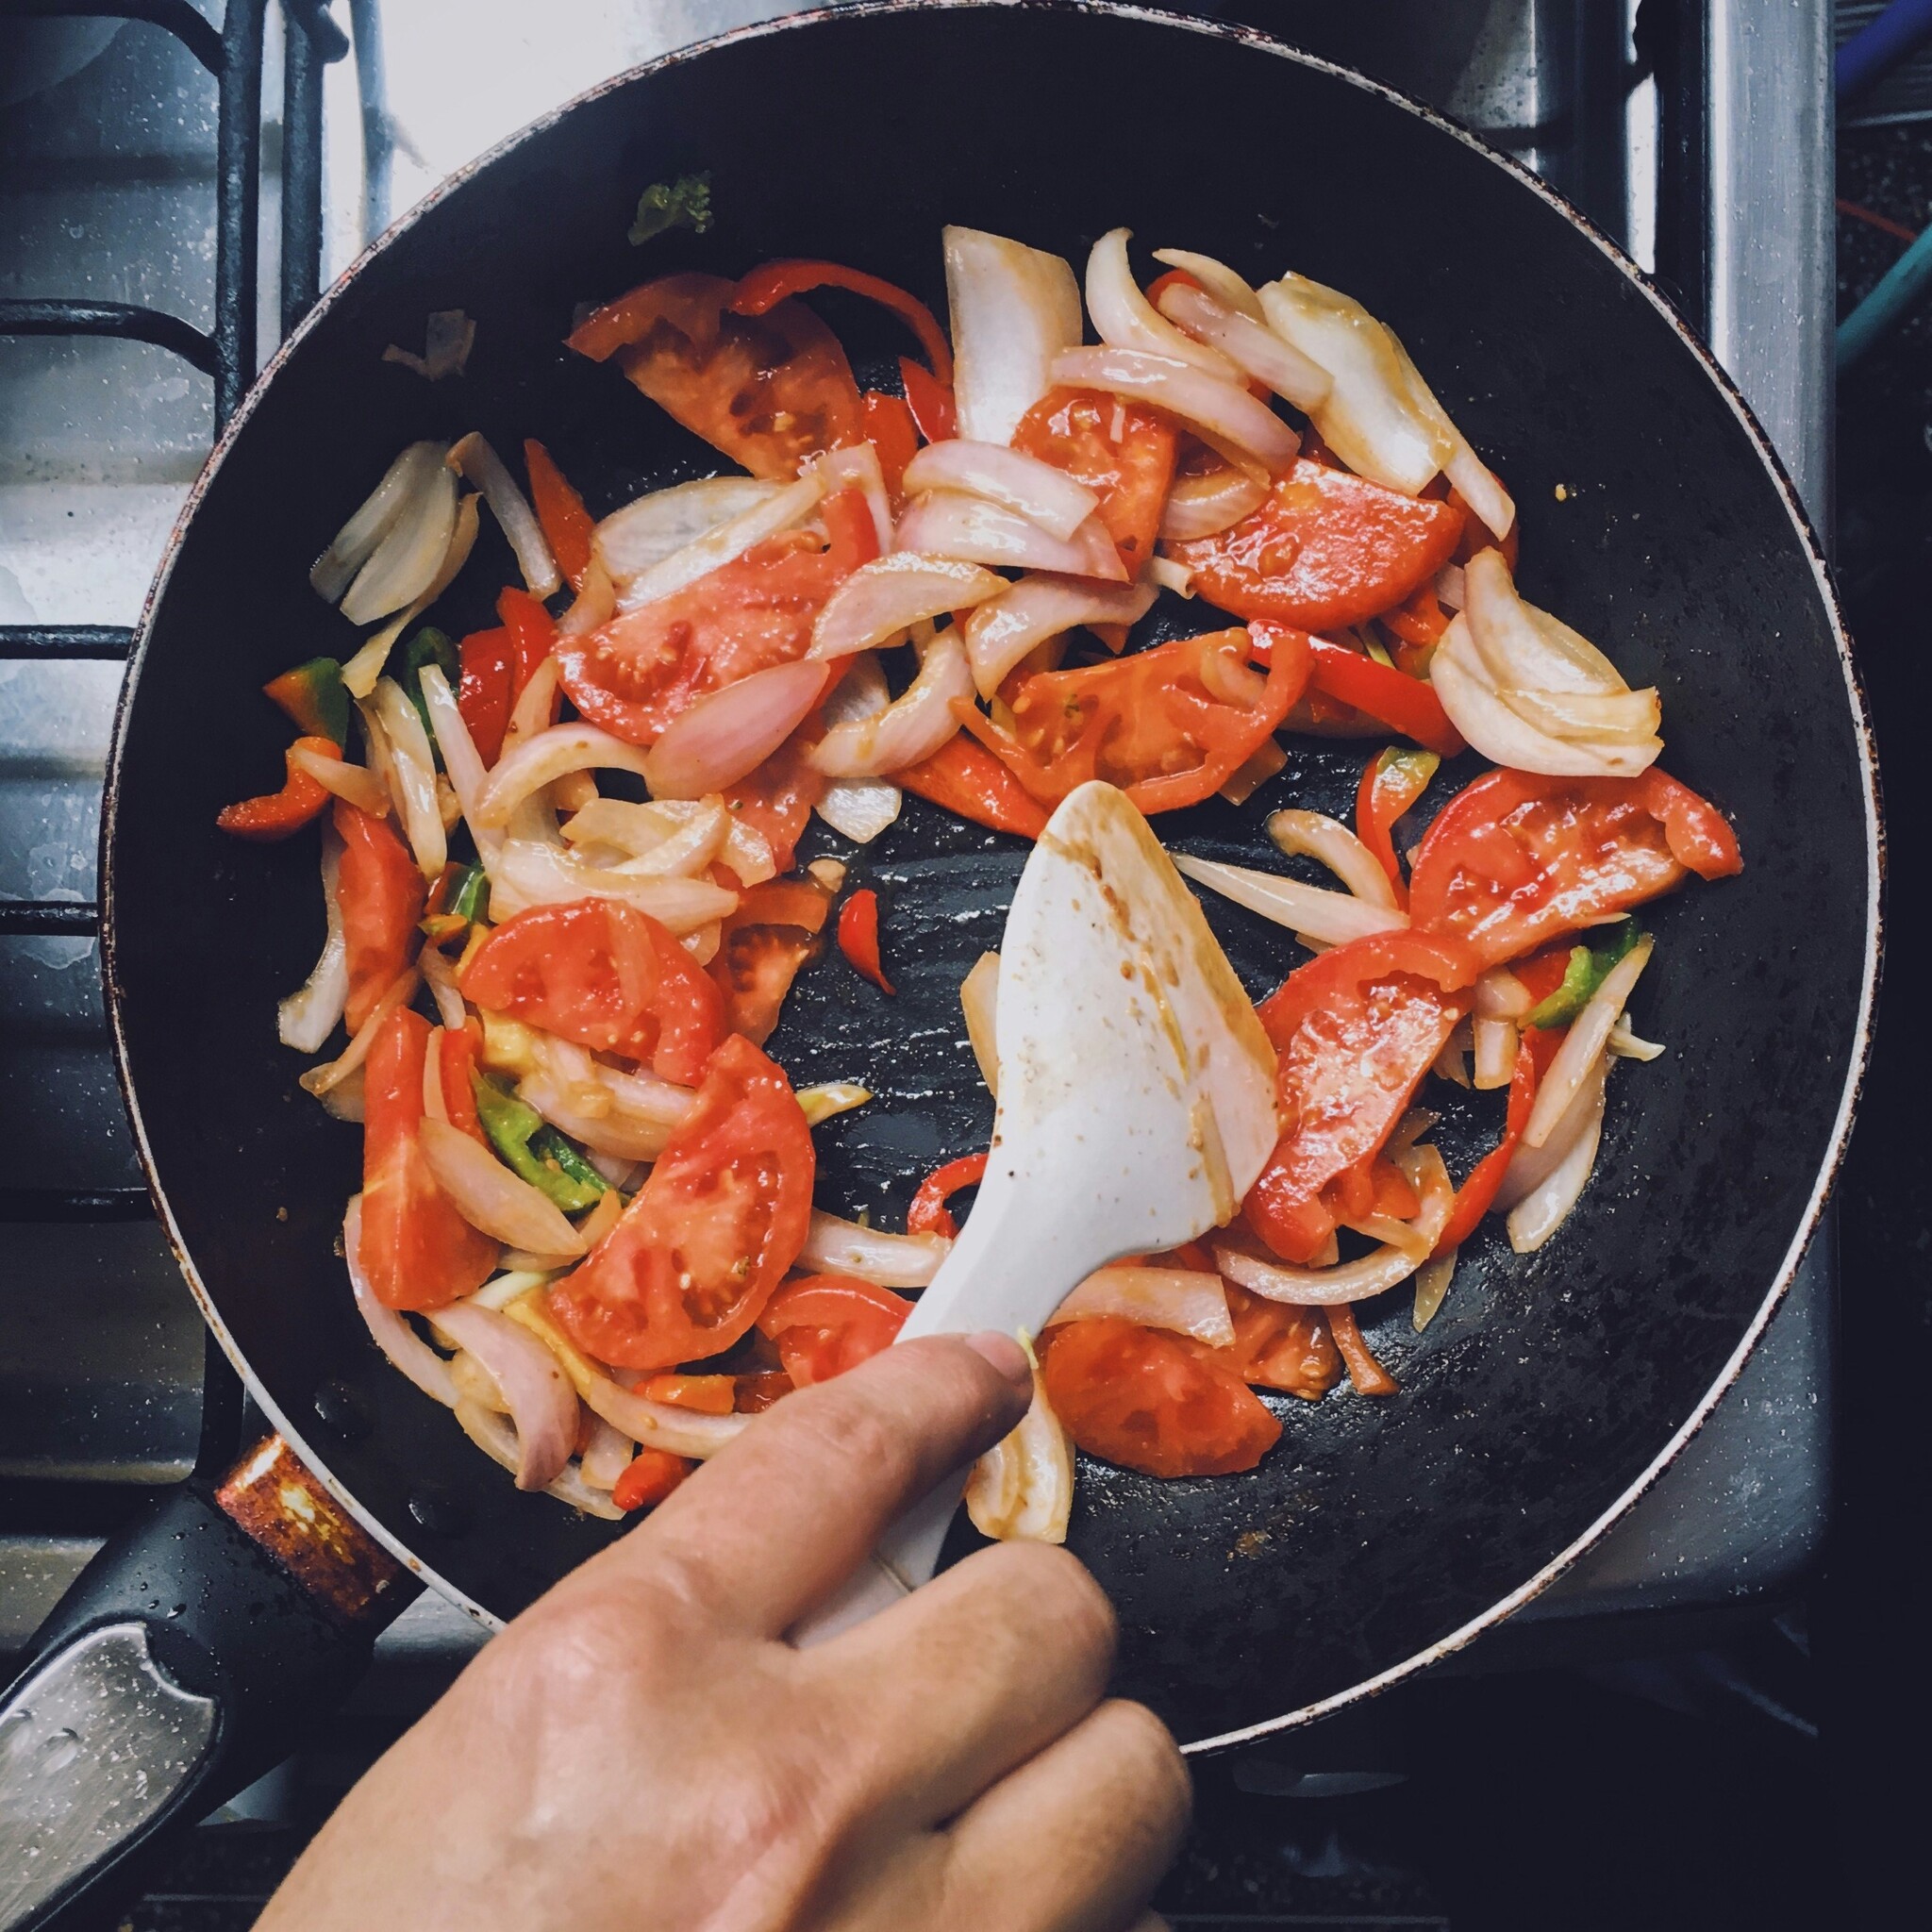 Tomatoes, white onions, and green peppers being sauteed in a skillet